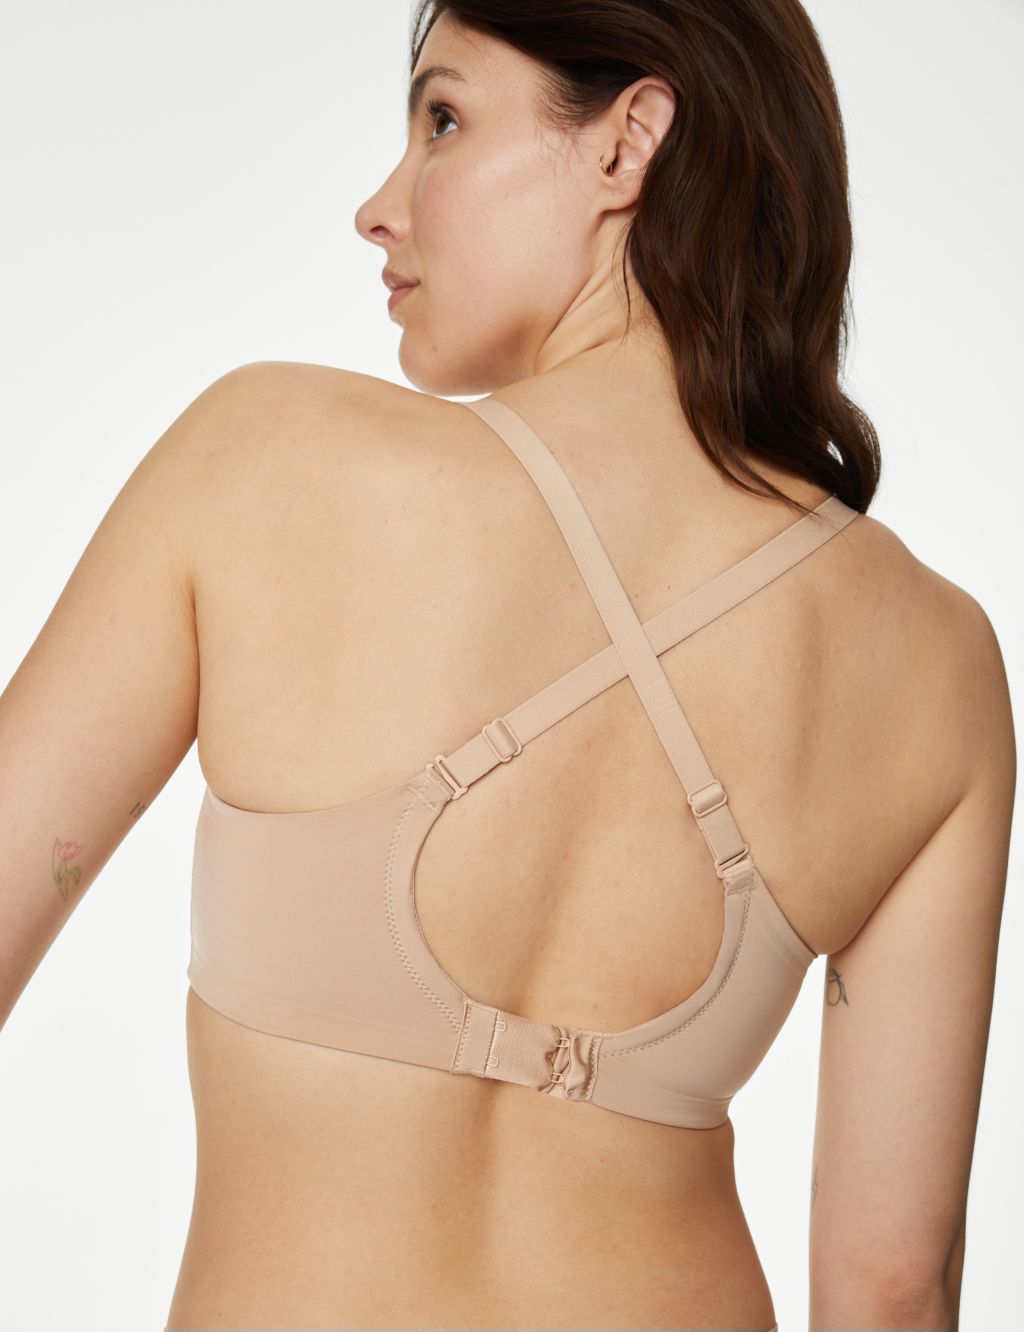 Flexifit™ Non-Wired Full Cup Bra F-H image 3